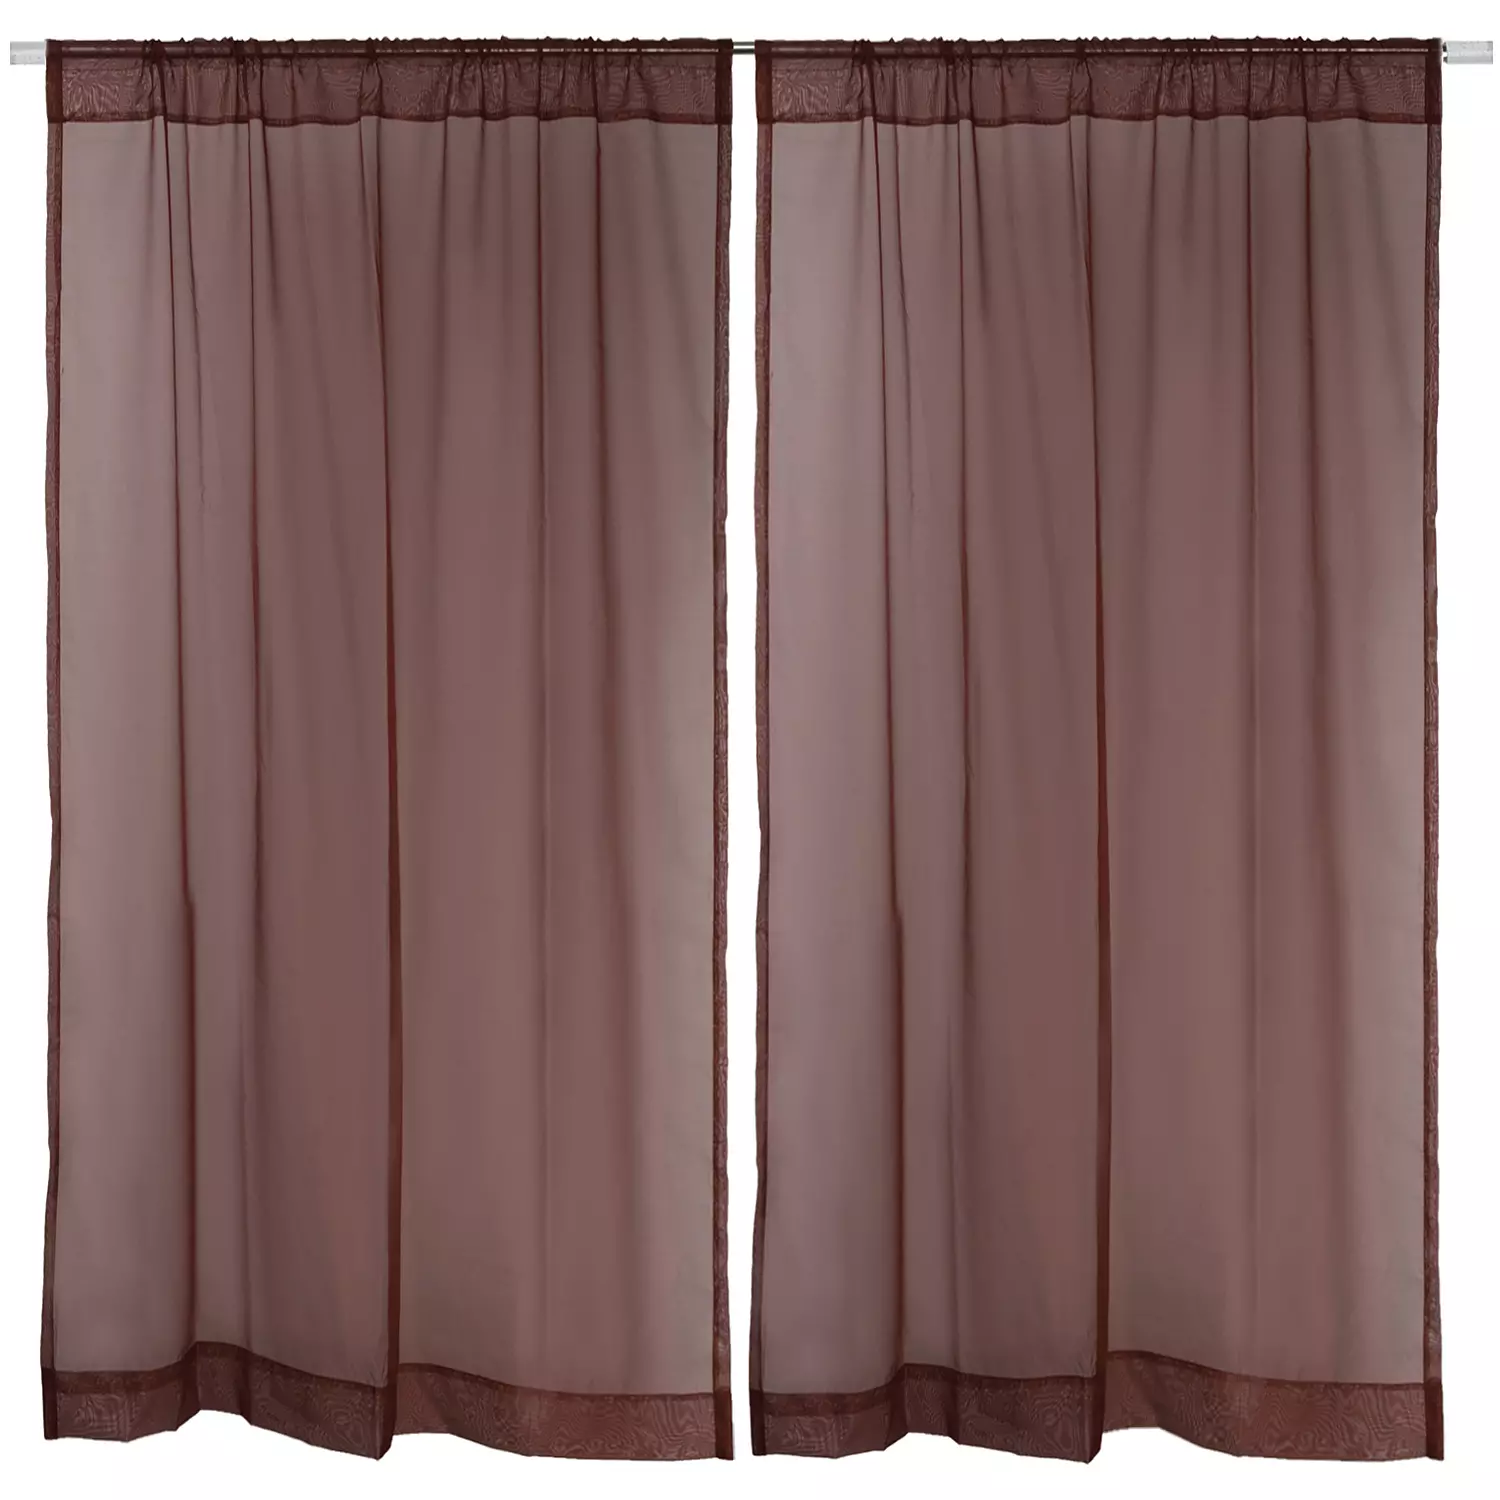 Two semi-sheer voile panels with rod pocket, 54"x84", dark